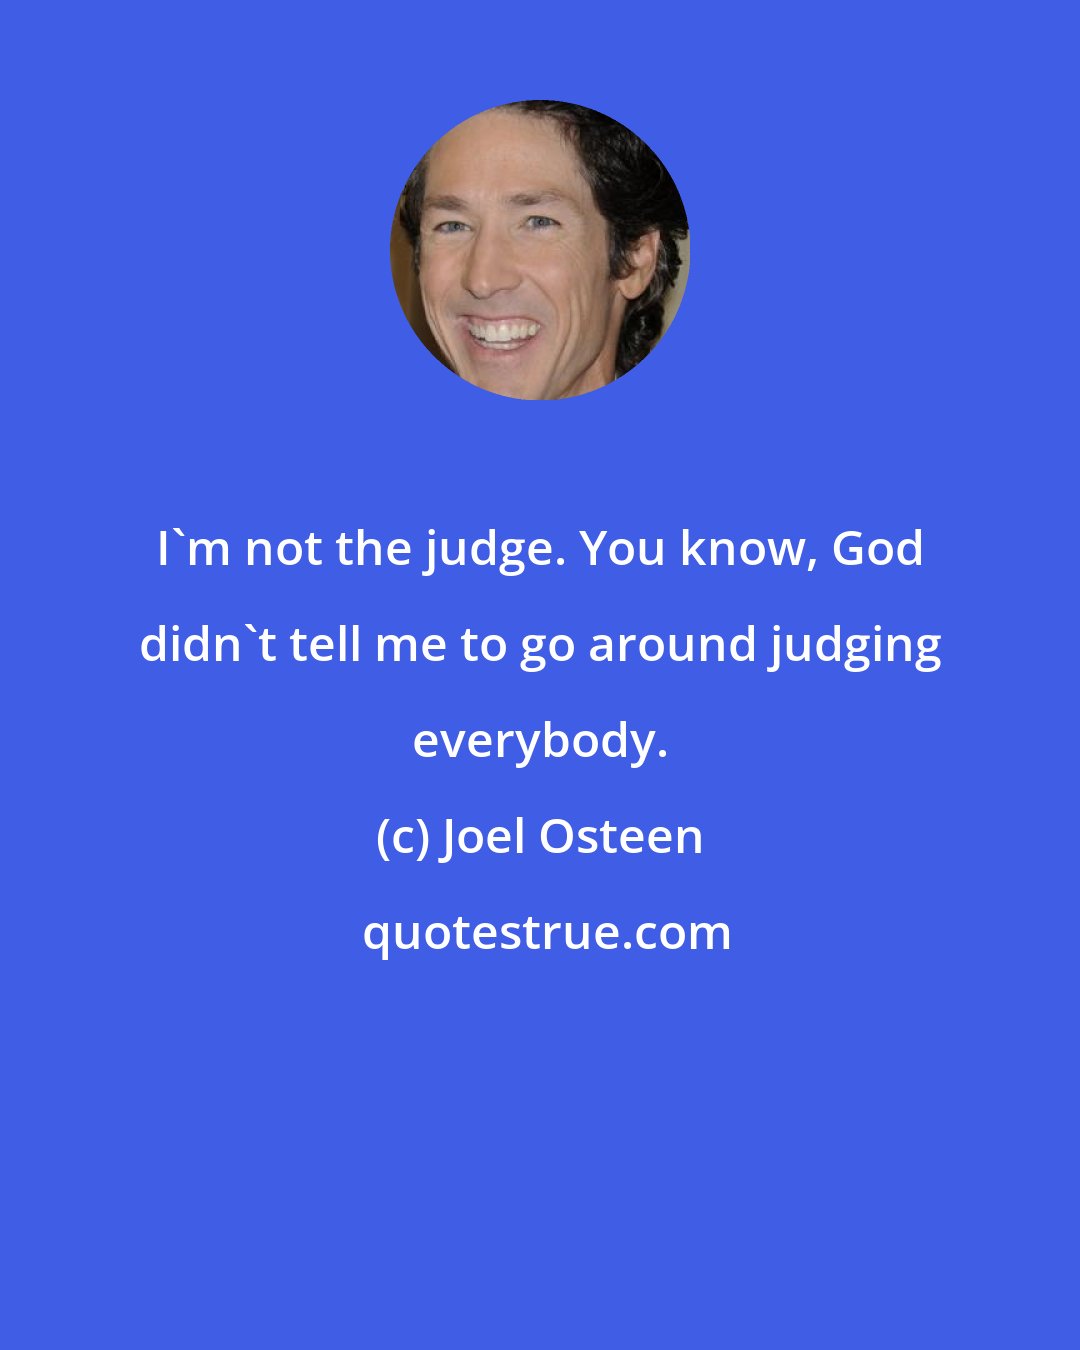 Joel Osteen: I'm not the judge. You know, God didn't tell me to go around judging everybody.